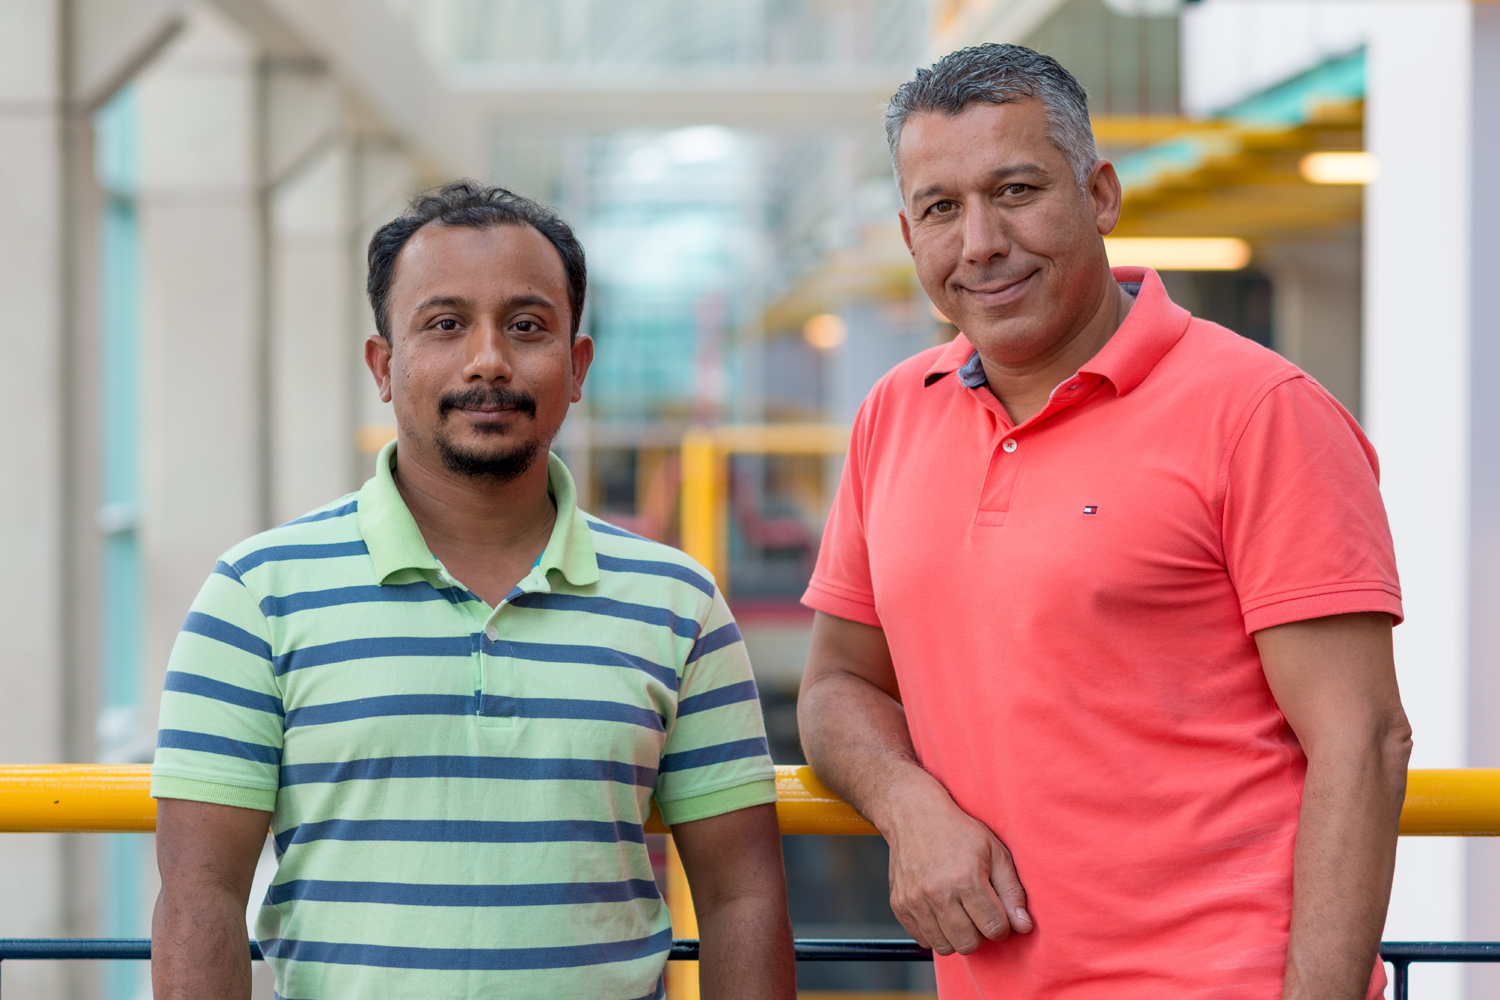 L to R: Nashid Shahriar, now an Assistant Professor, Department of Computer Science at the University of Regina, and his PhD supervisor, Raouf Boutaba, Director and Professor, Cheriton School of Computer Science